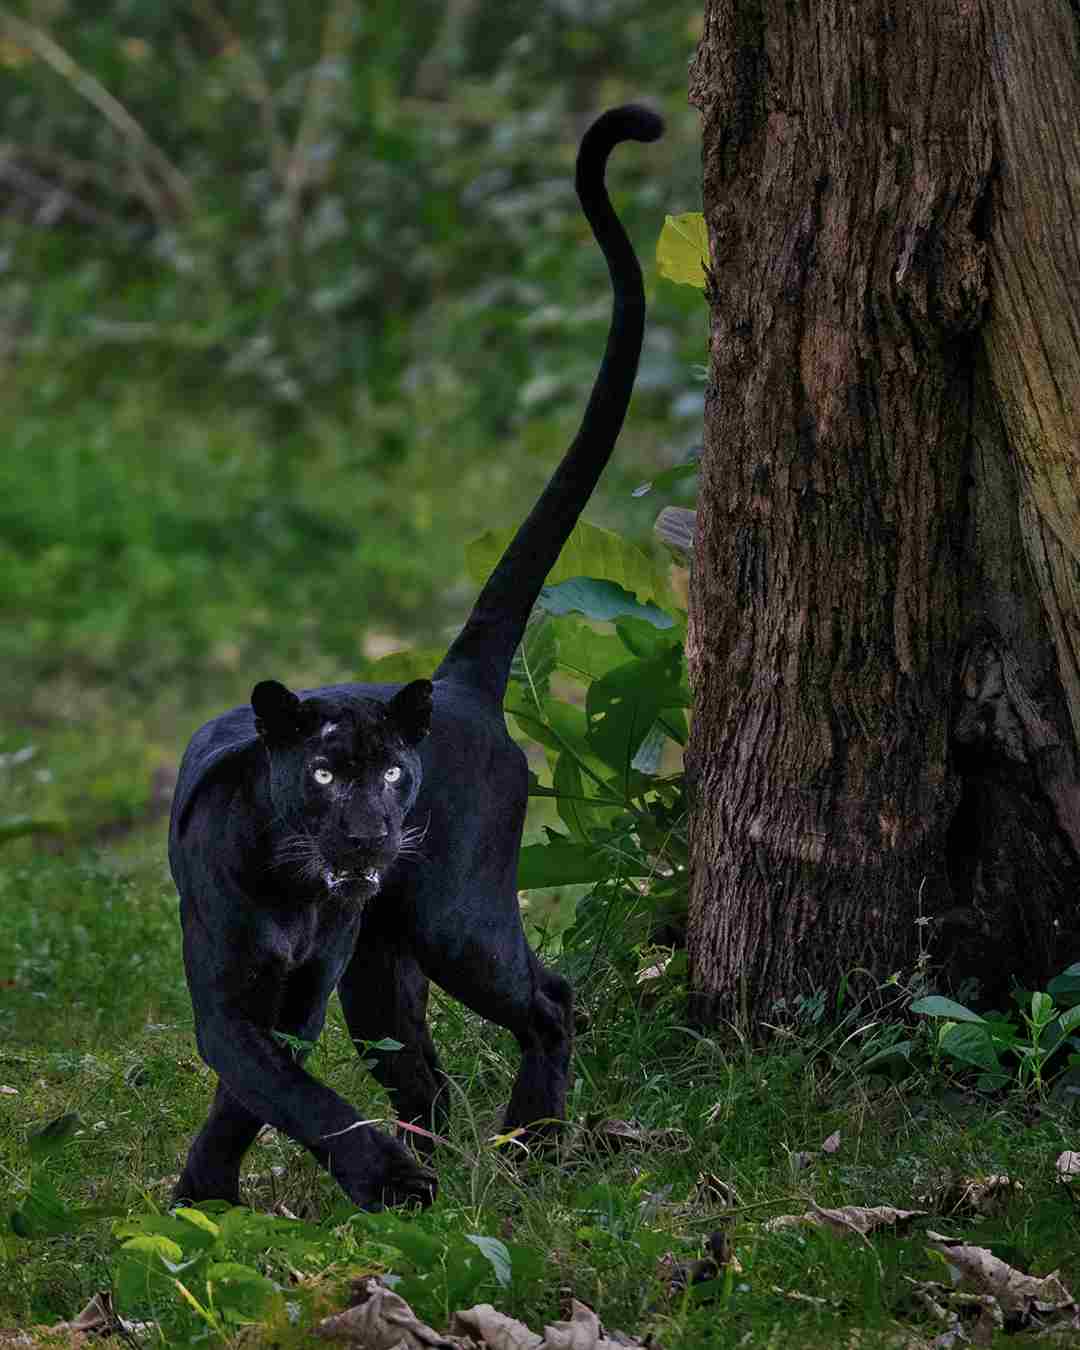 Black Leopard Vs Black Jaguar: Human Activities like Poaching Threaten the Survival of Wild Leopards (Credit: Darshan Ganapathy 2021 .CC BY-SA 4.0.)